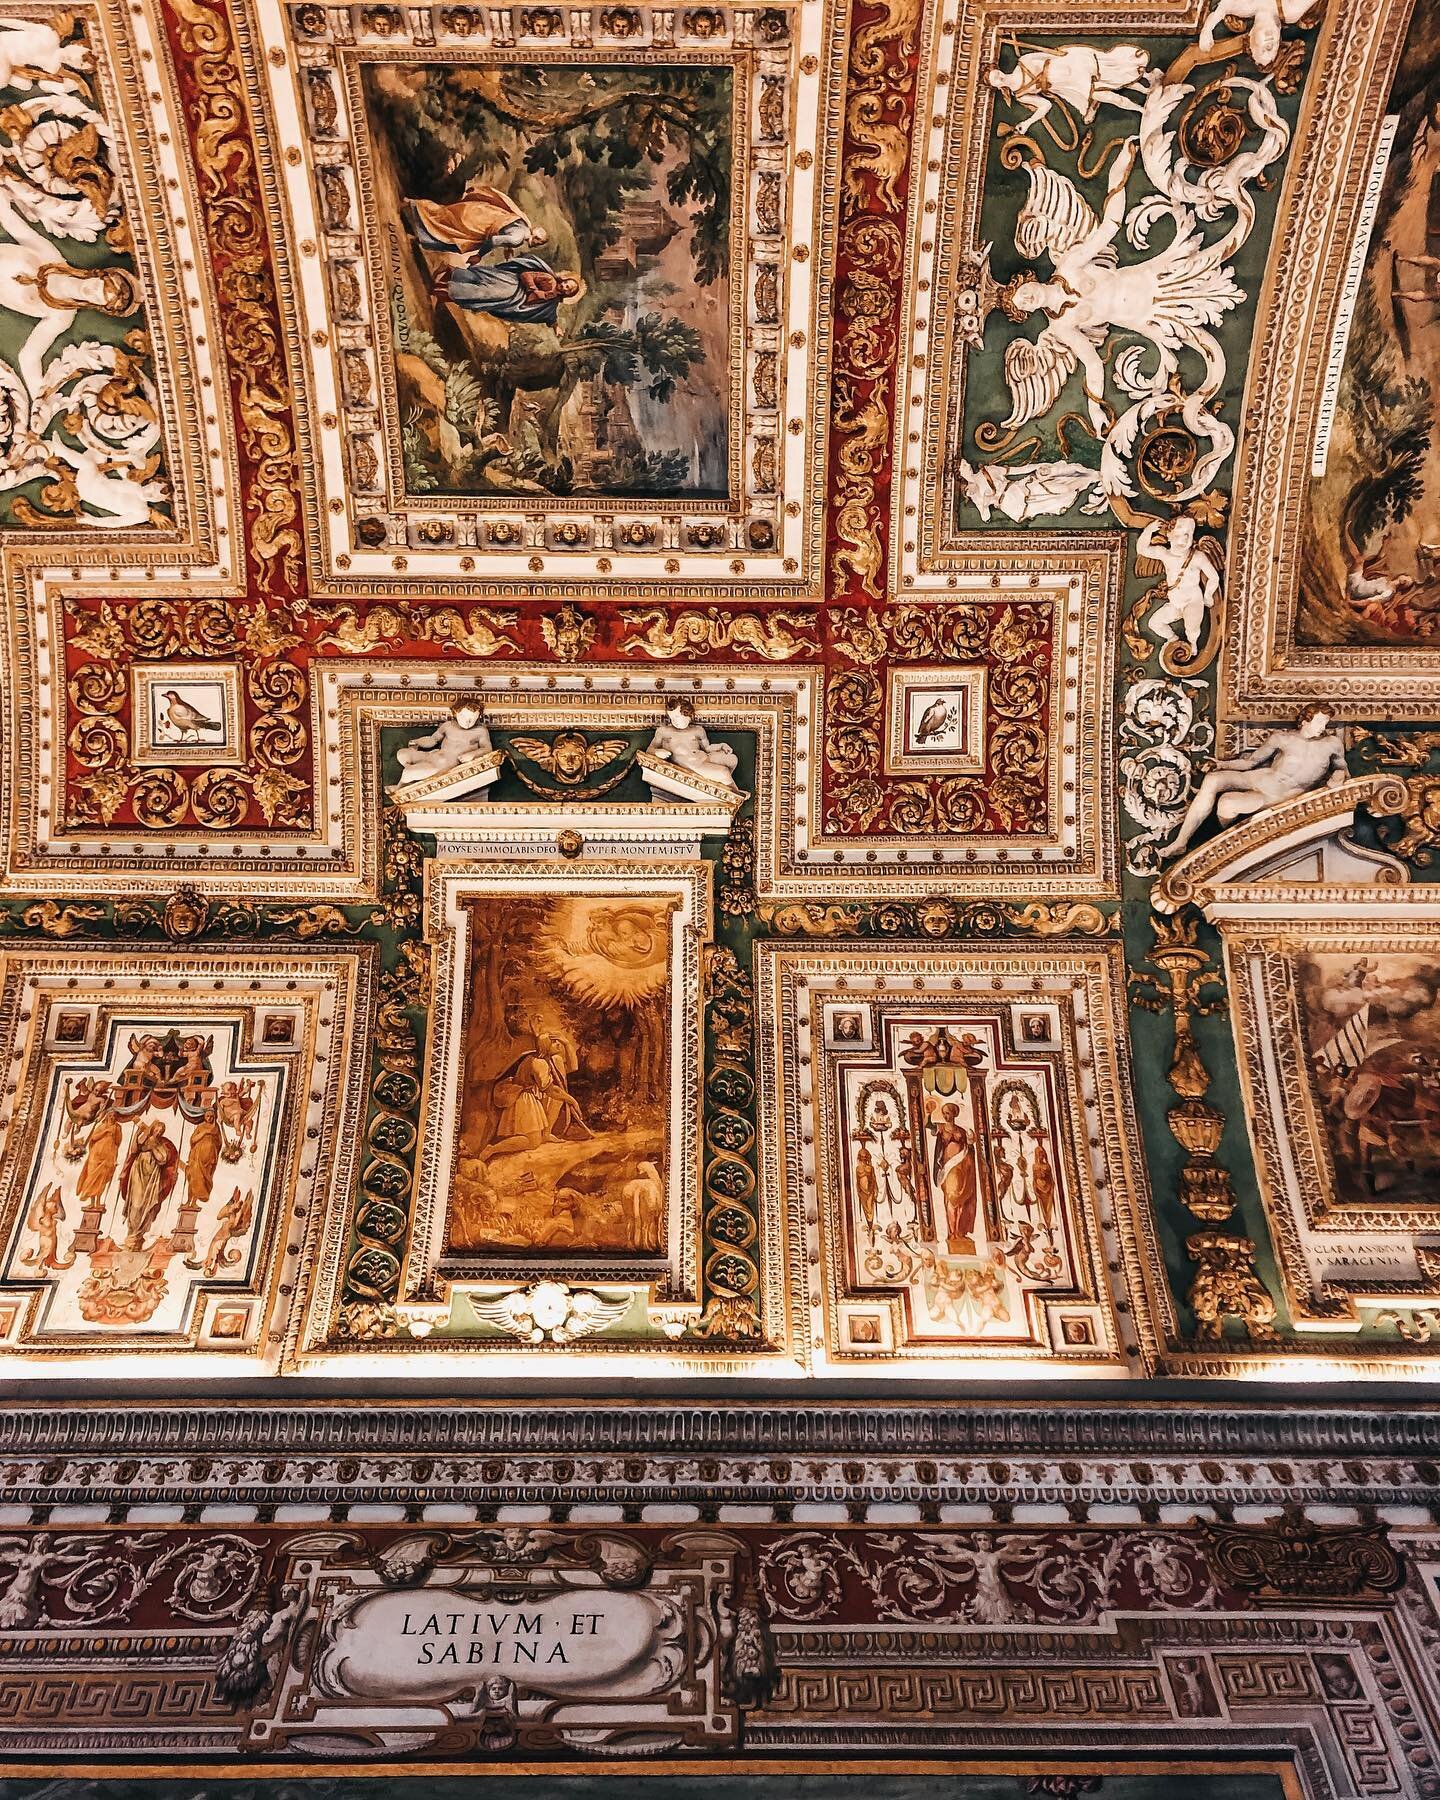 oh baby 😍 the colors and the details of the vatican museums wow